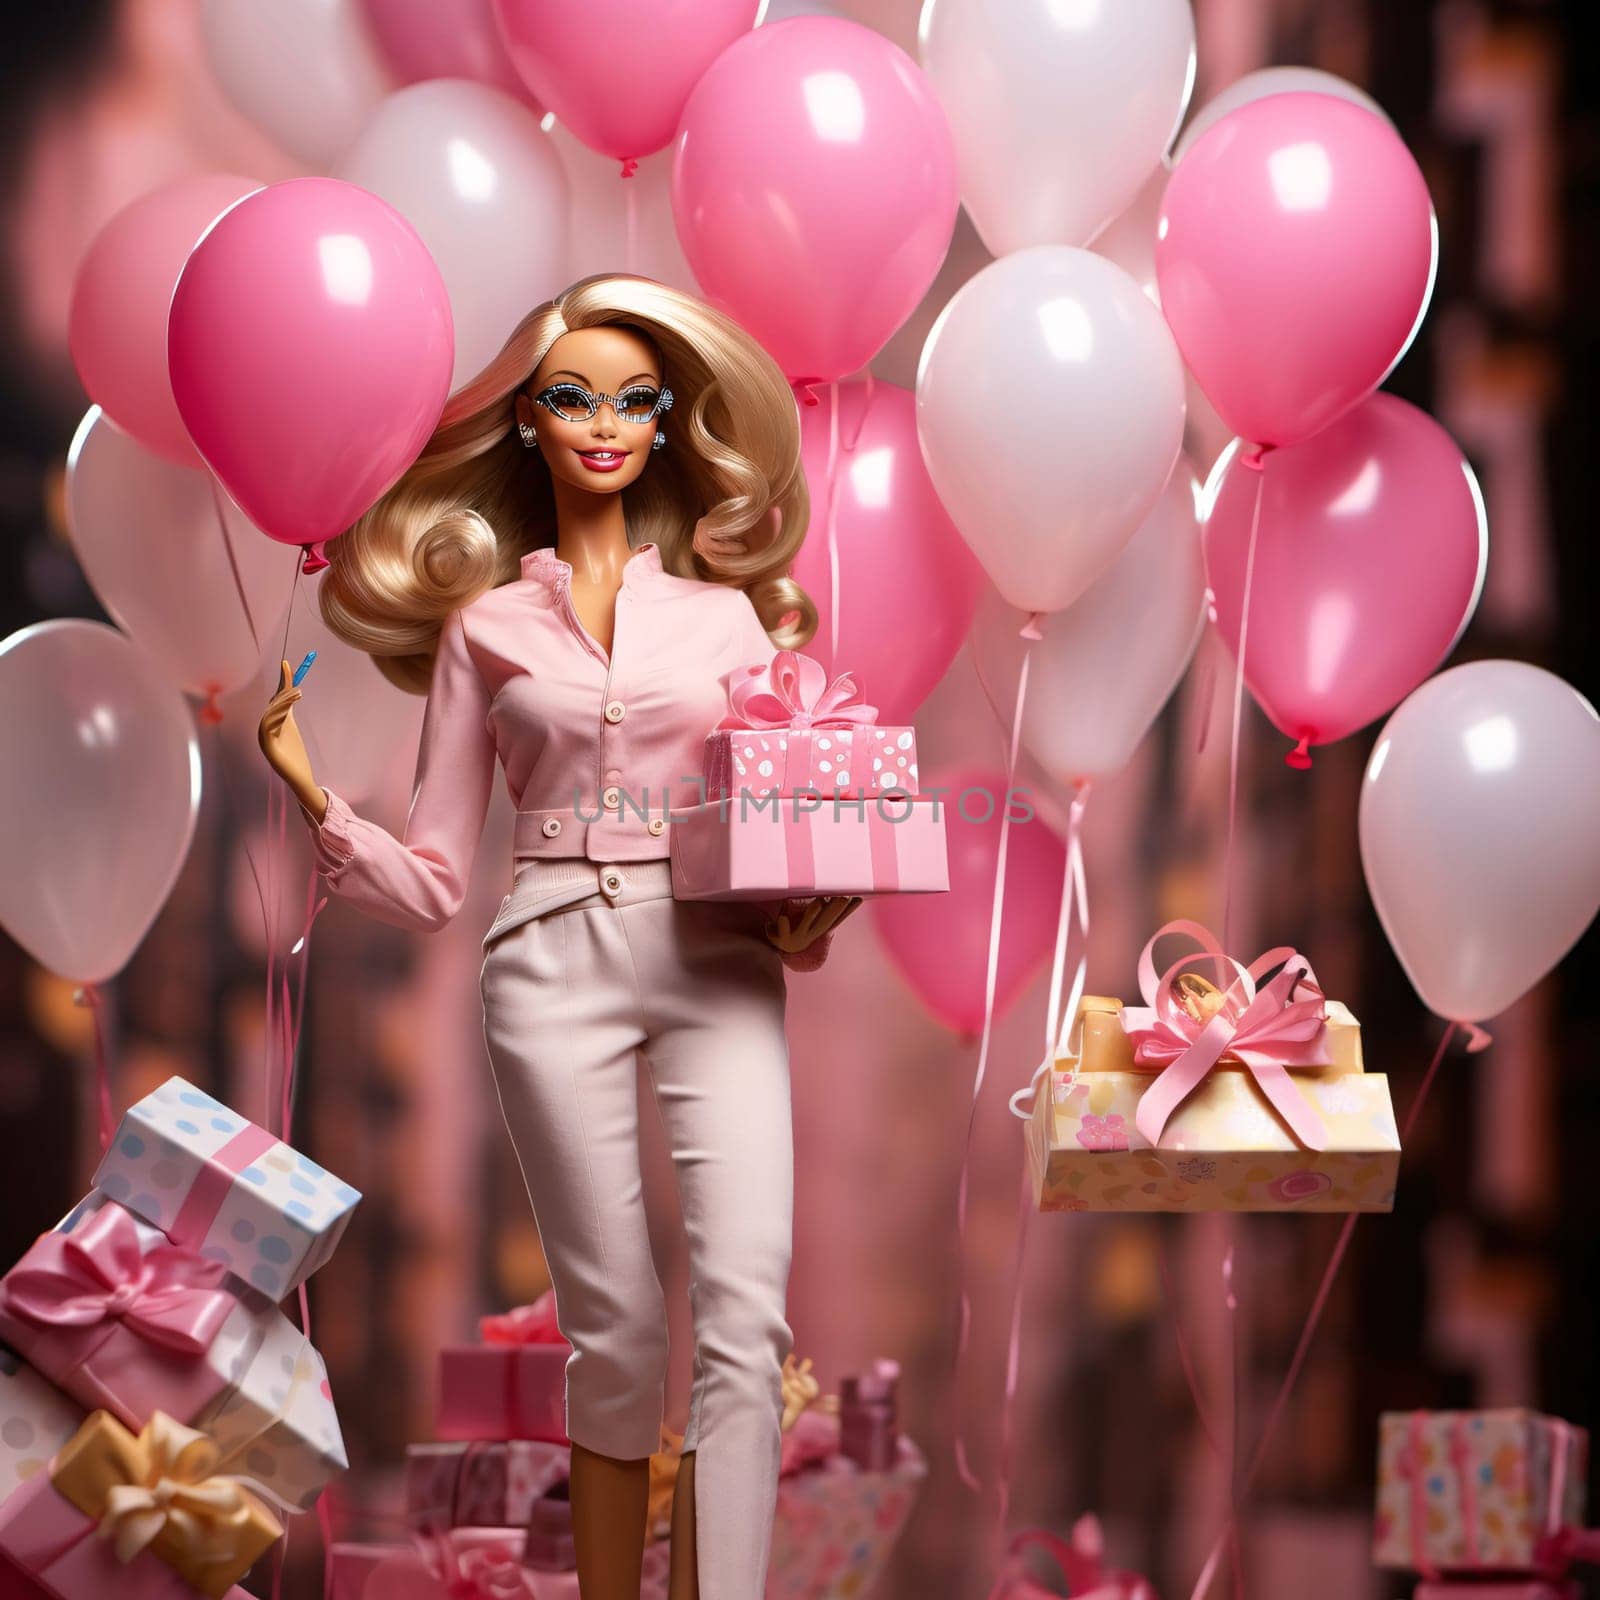 Blonde-haired Barbie doll, next to pink balloons and gifts. Gifts as a day symbol of present and love. A time of falling in love and love.